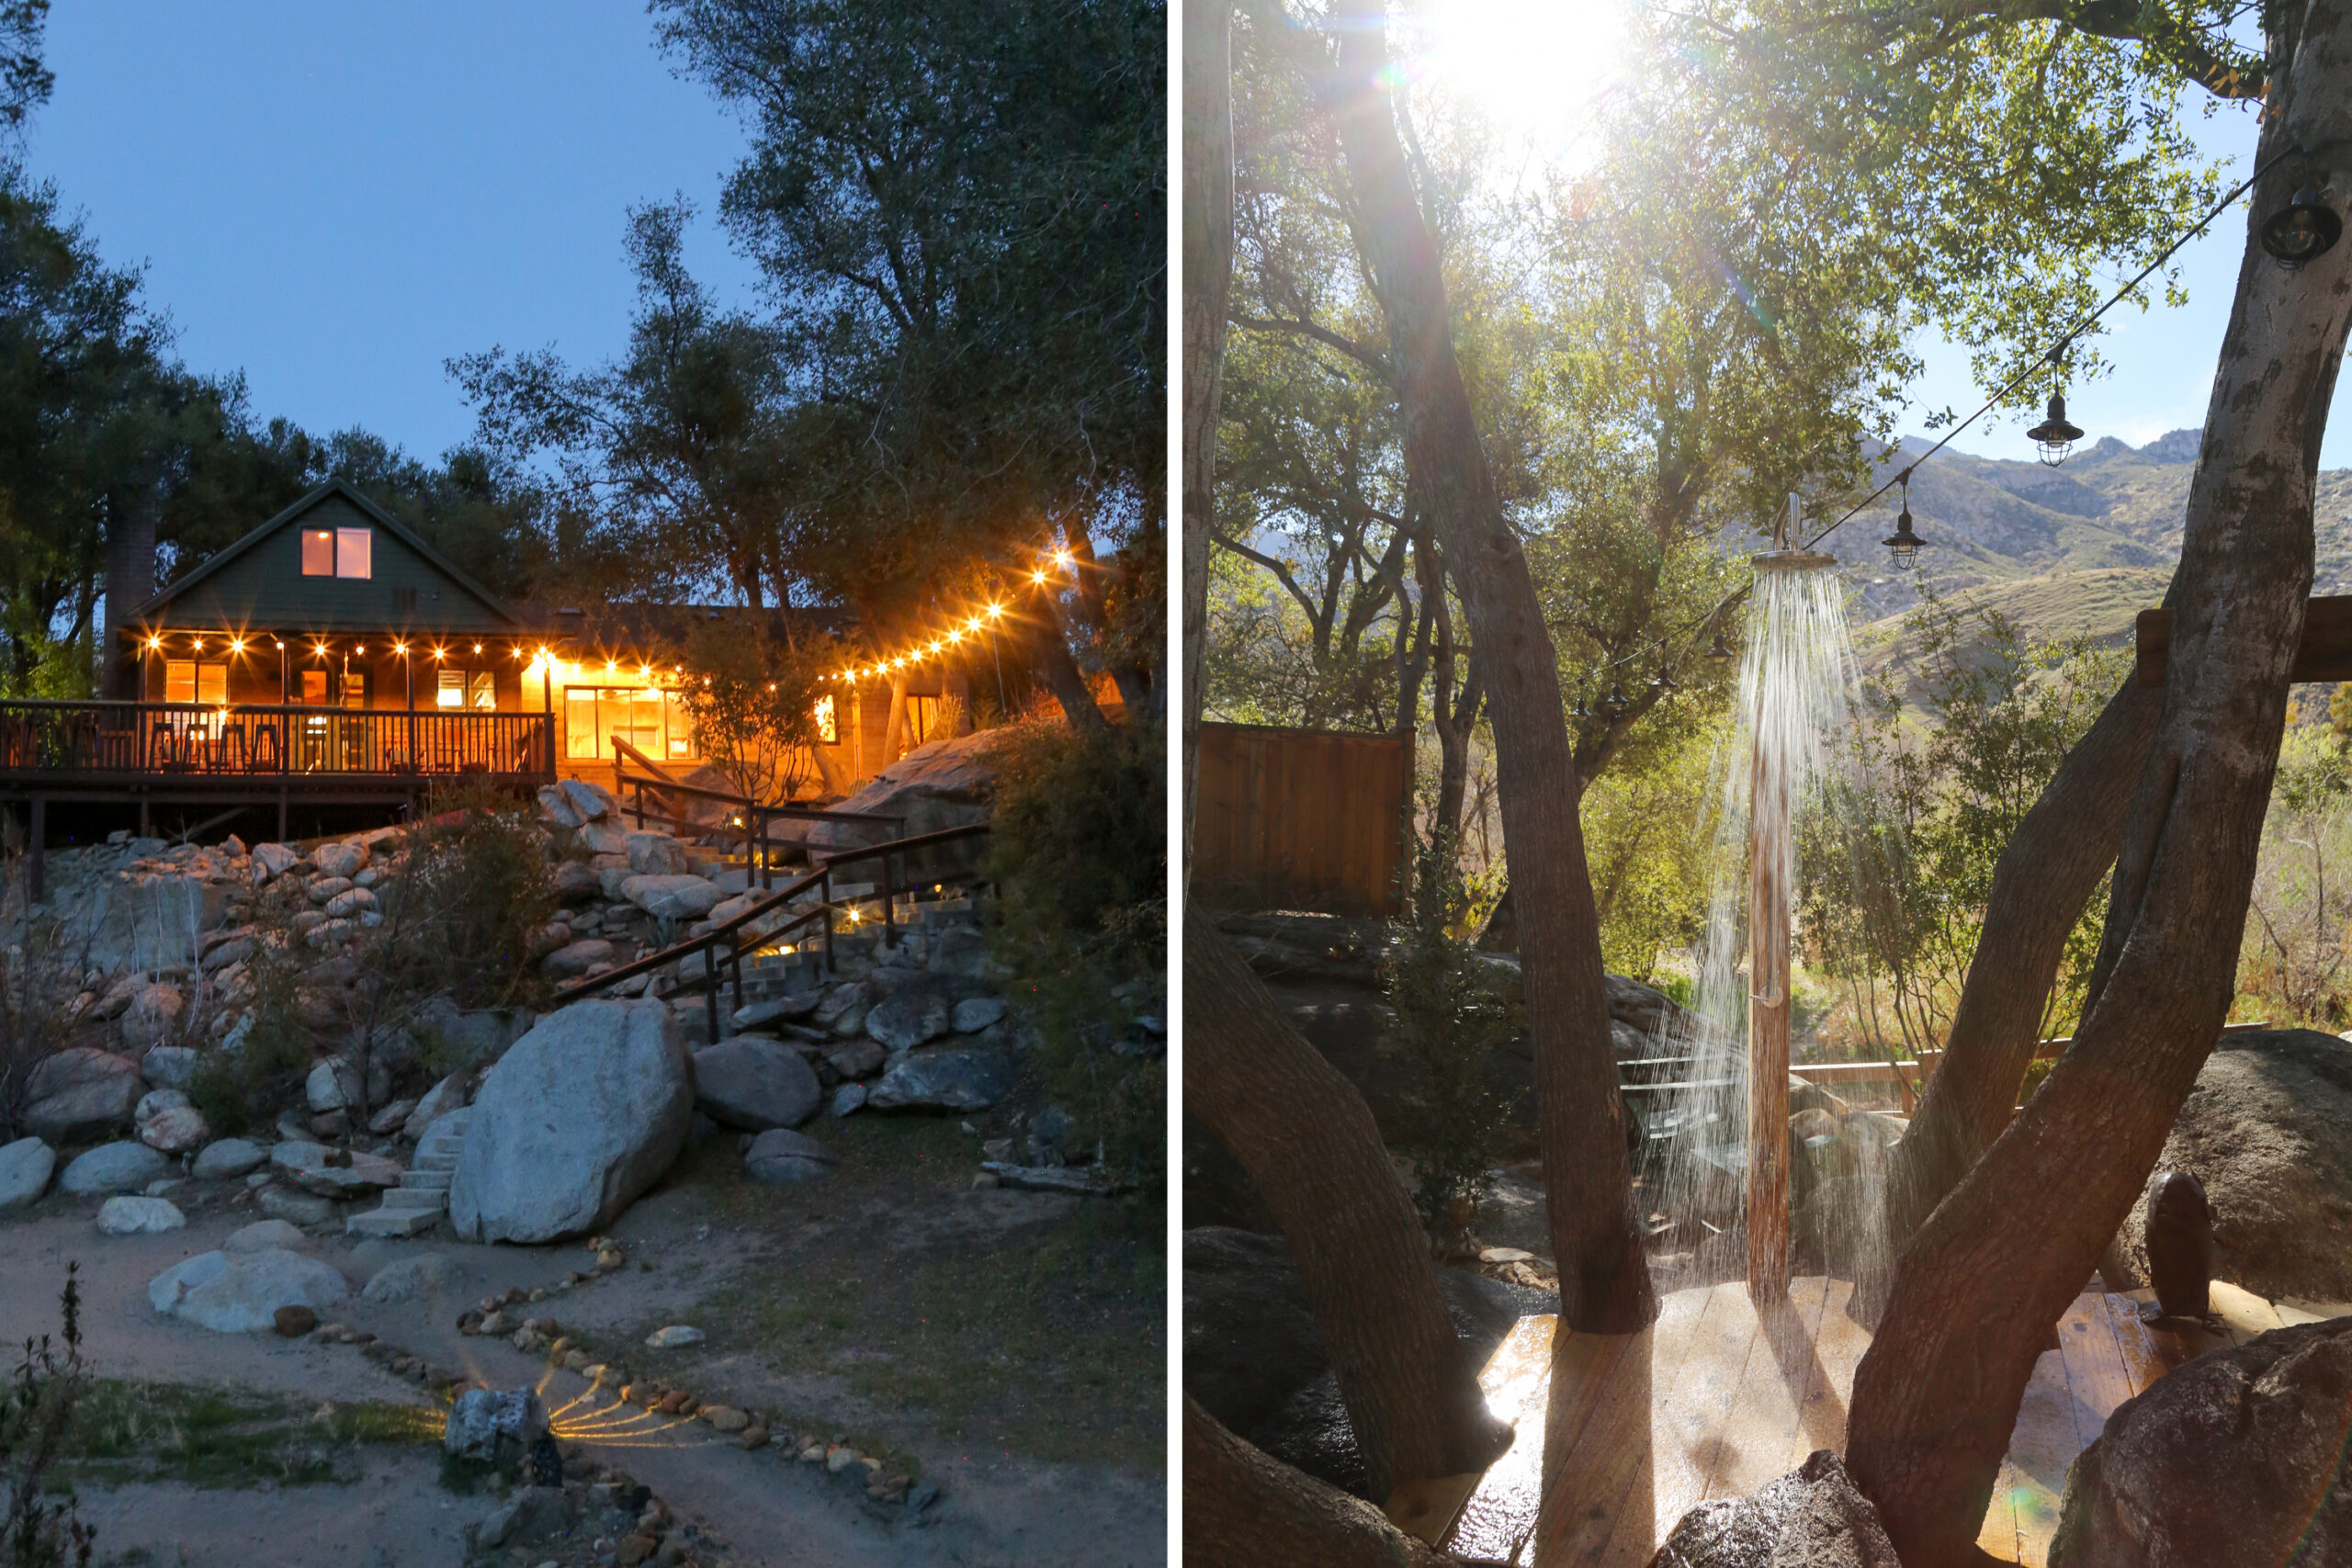 Photo of patio lights at night on the left and a photo of an outdoor shower set amongst some trees at Kern River House in Kernville, California.